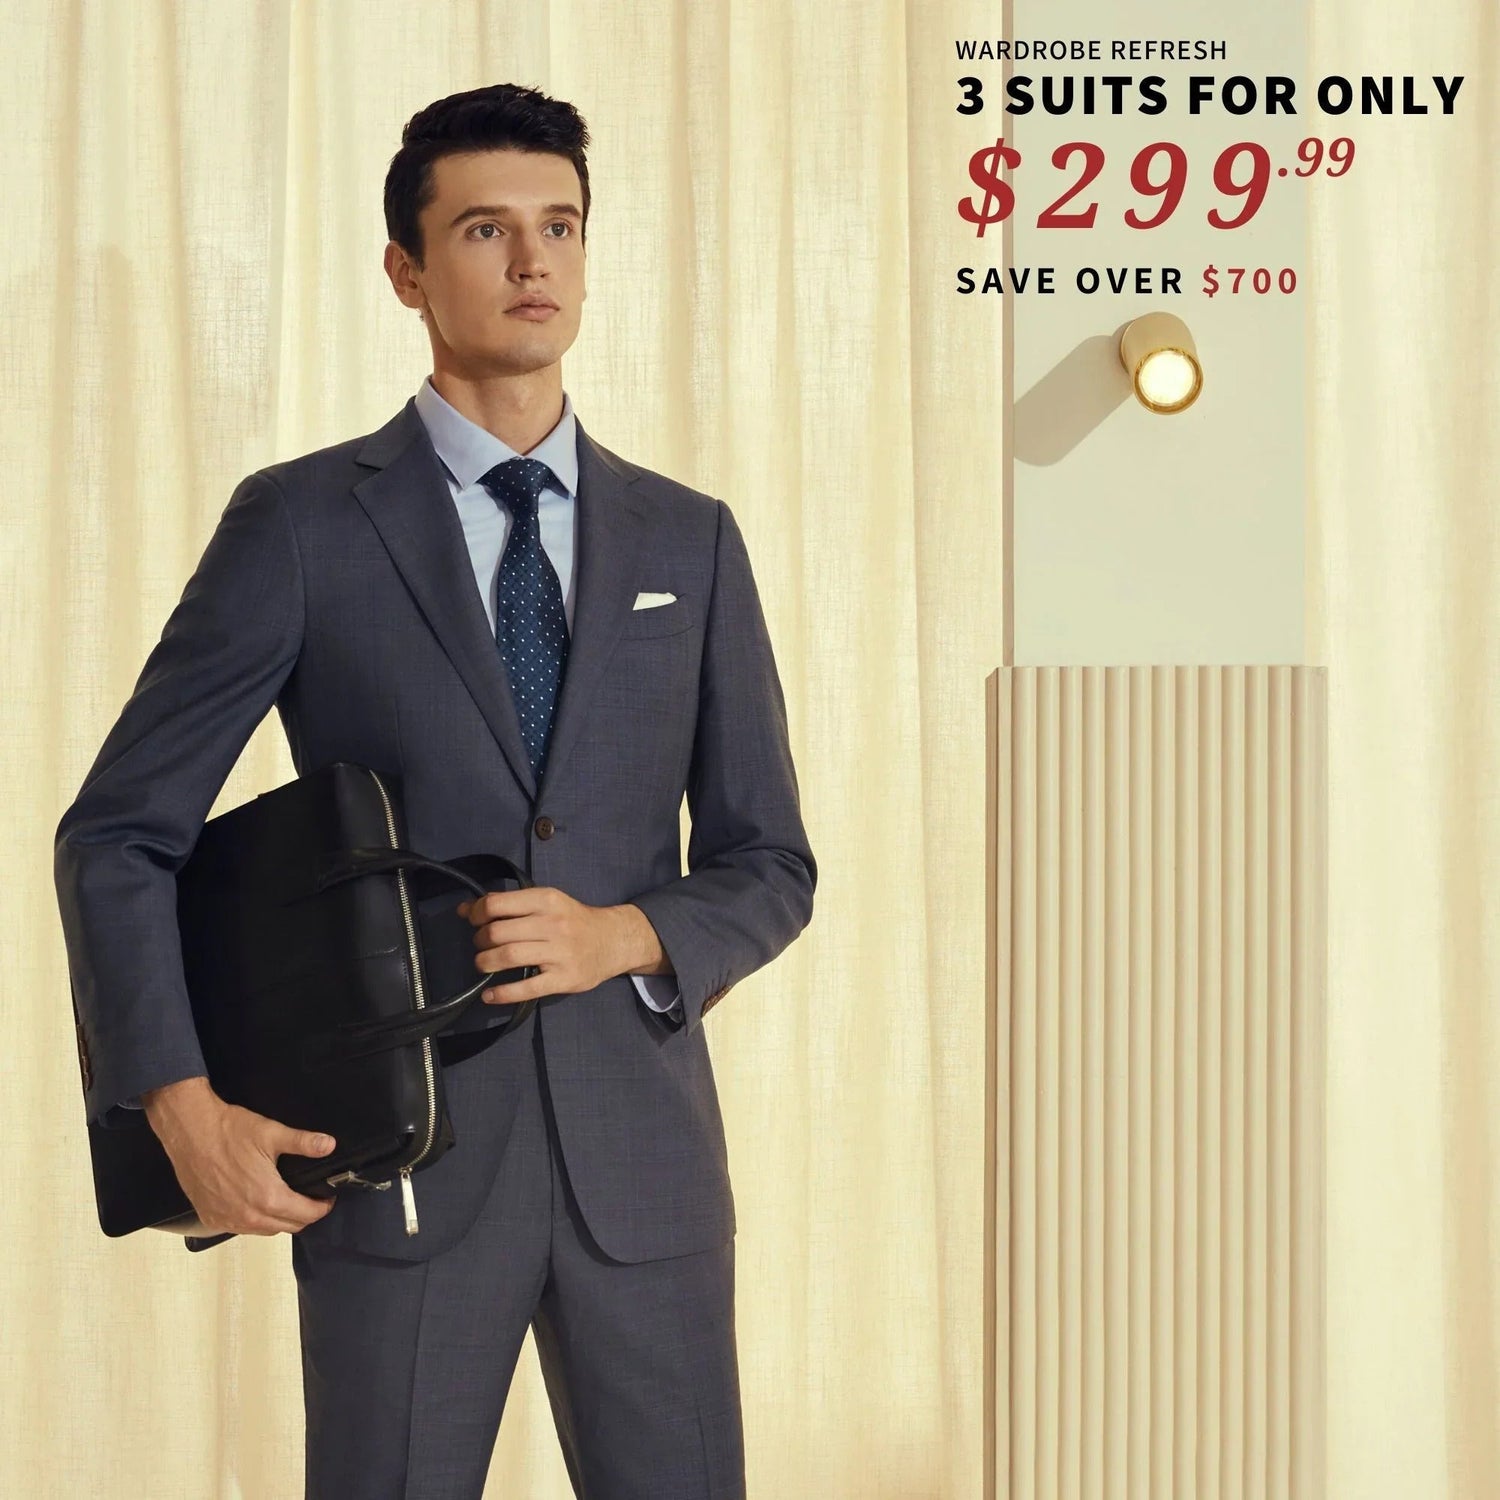 A man in a suit holding a briefcase, wearing an impeccably fitted BYOB jacket.